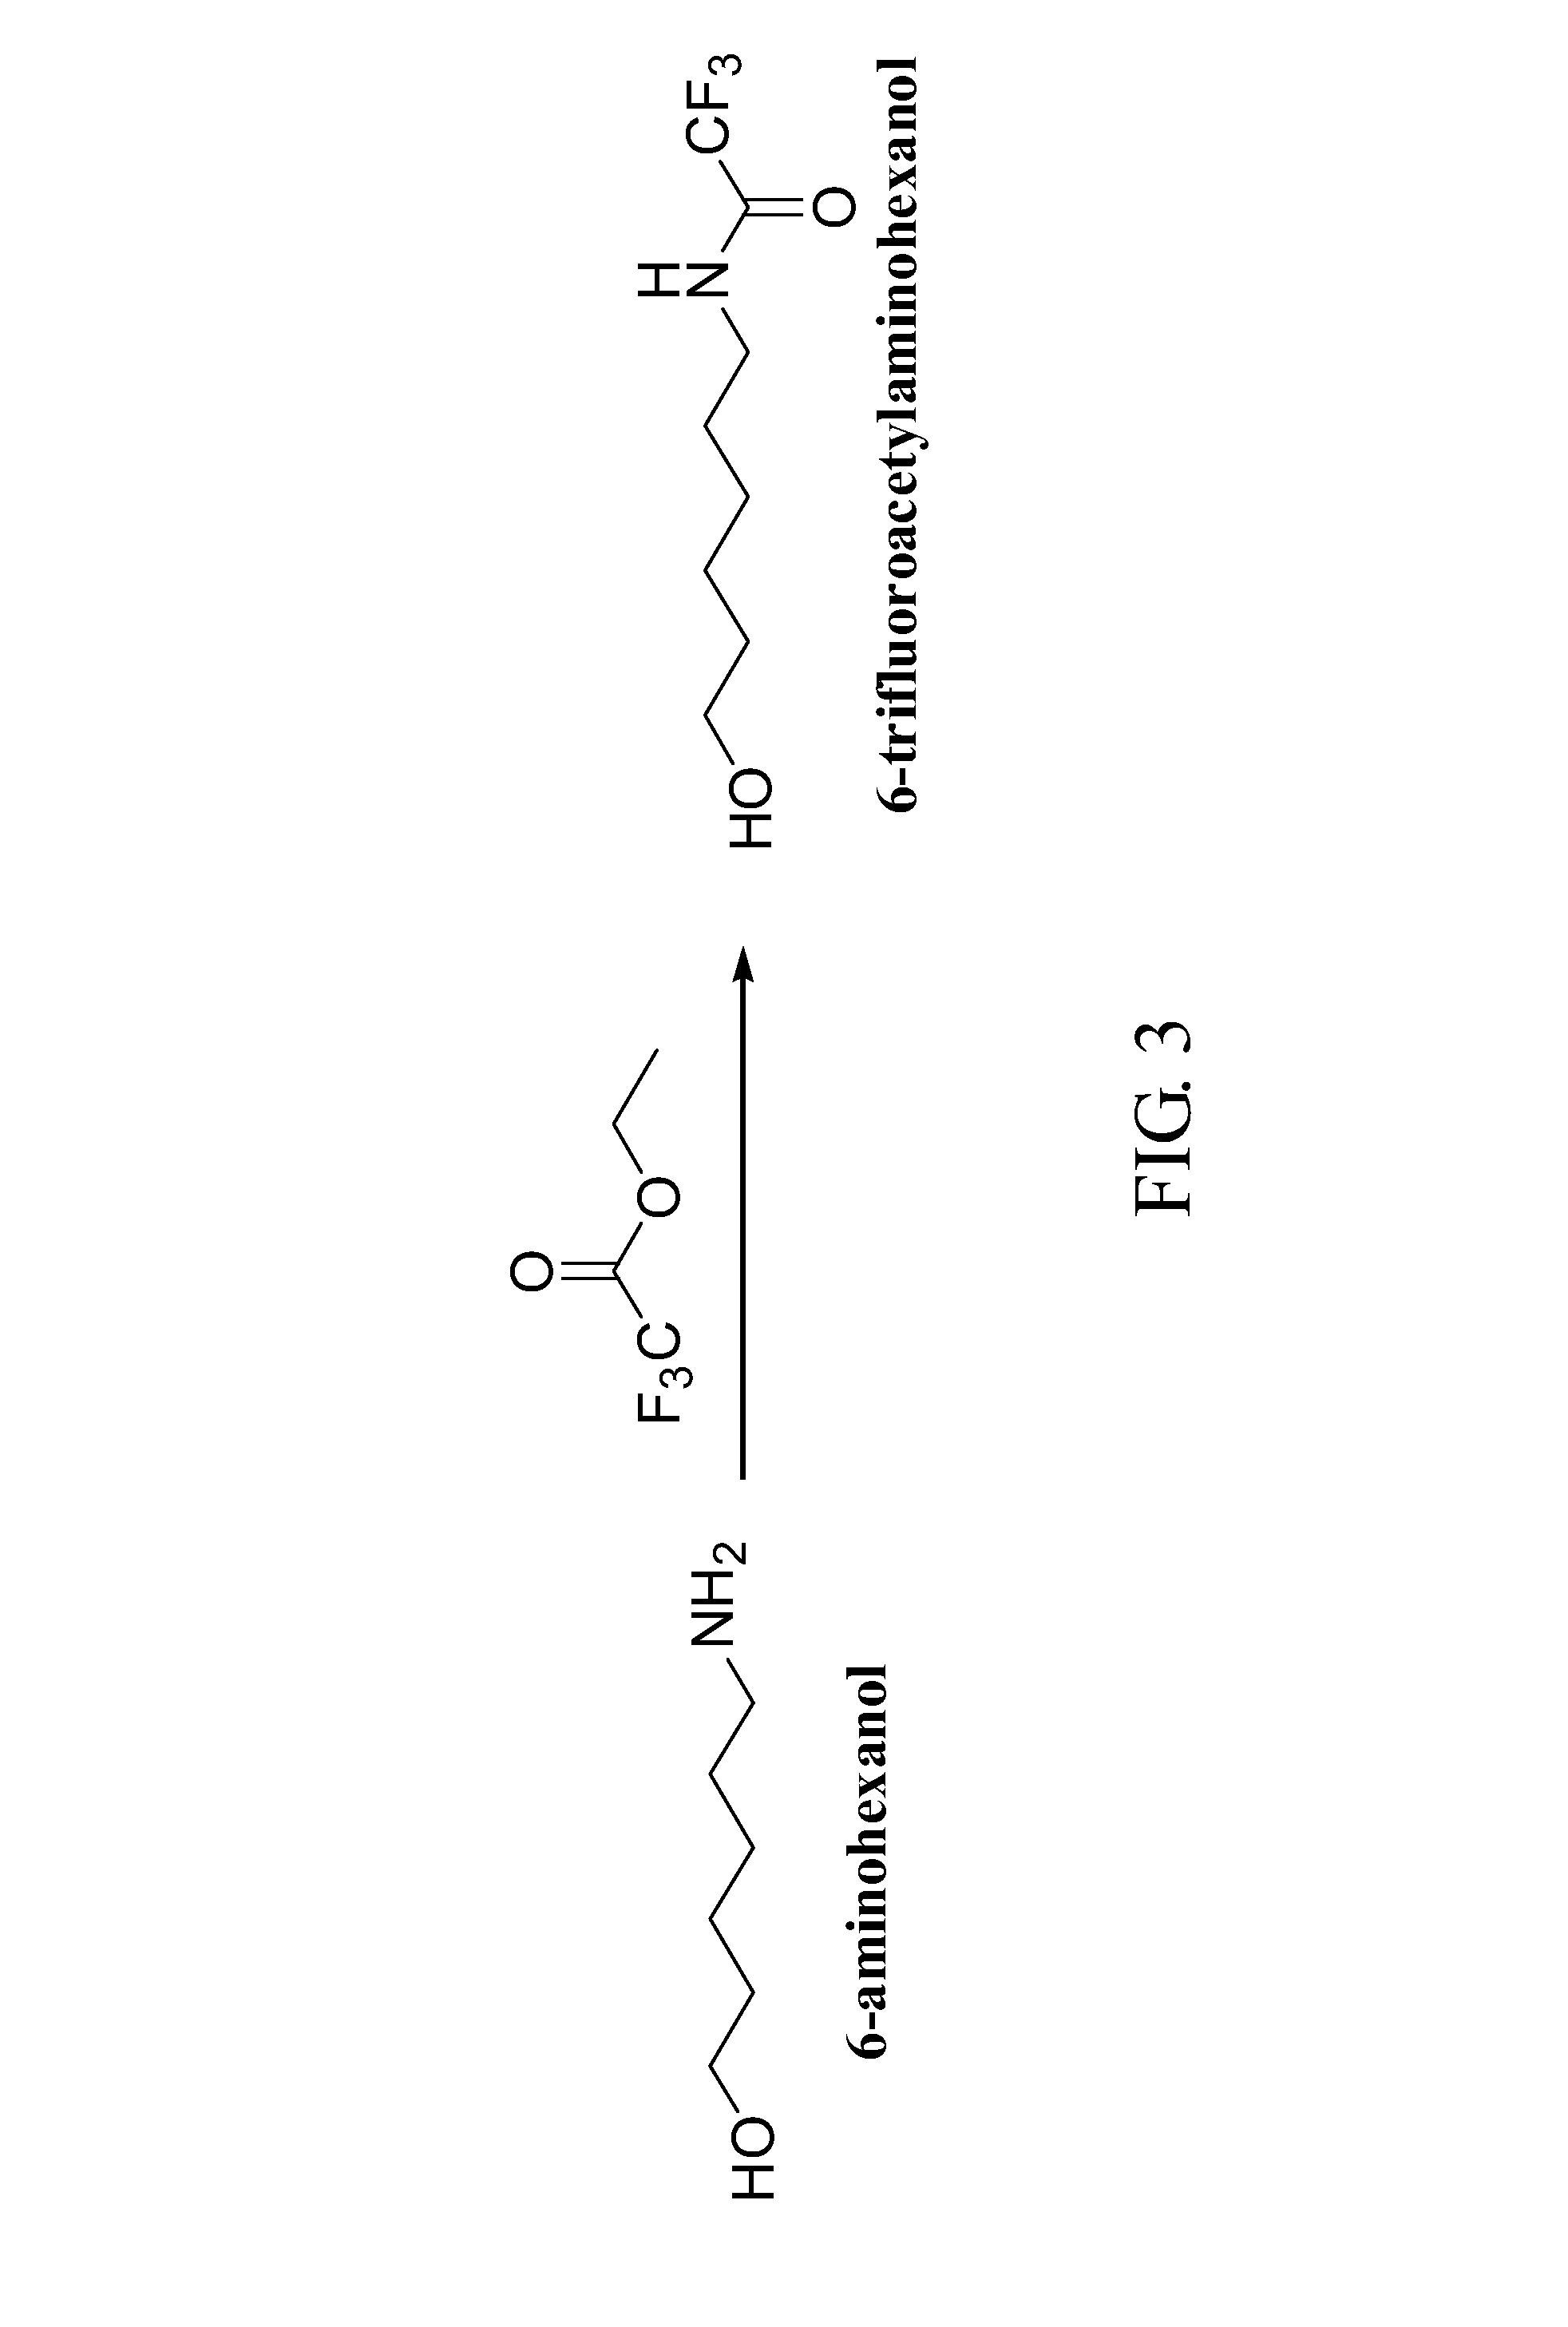 Liver-targeting agents and their synthesis